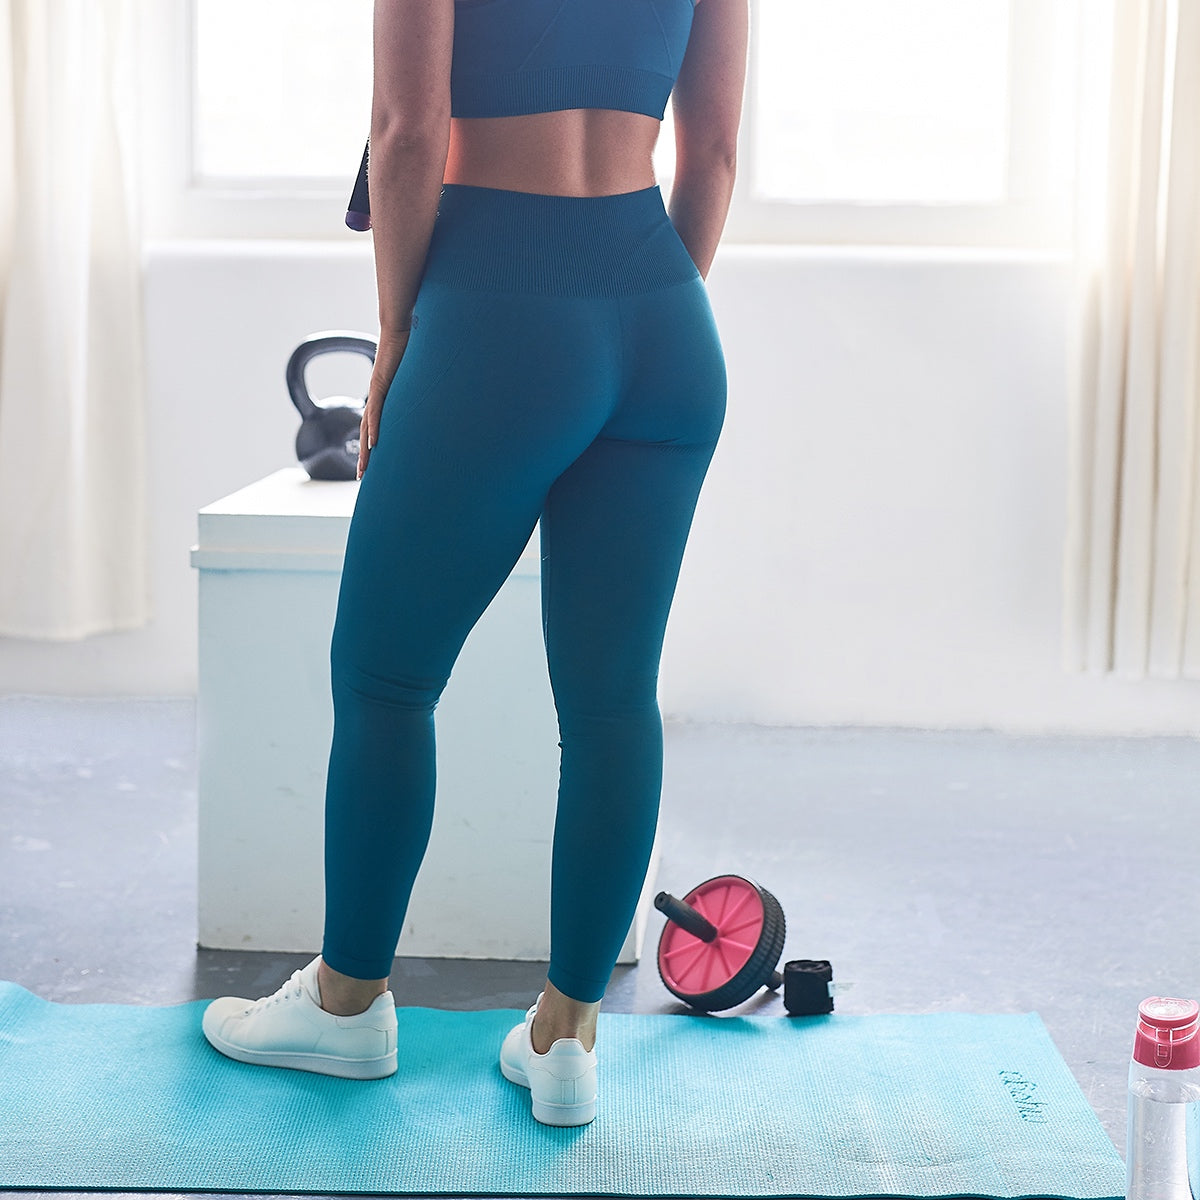 Levana Leggings in Teal – The Gym Wear Boutique